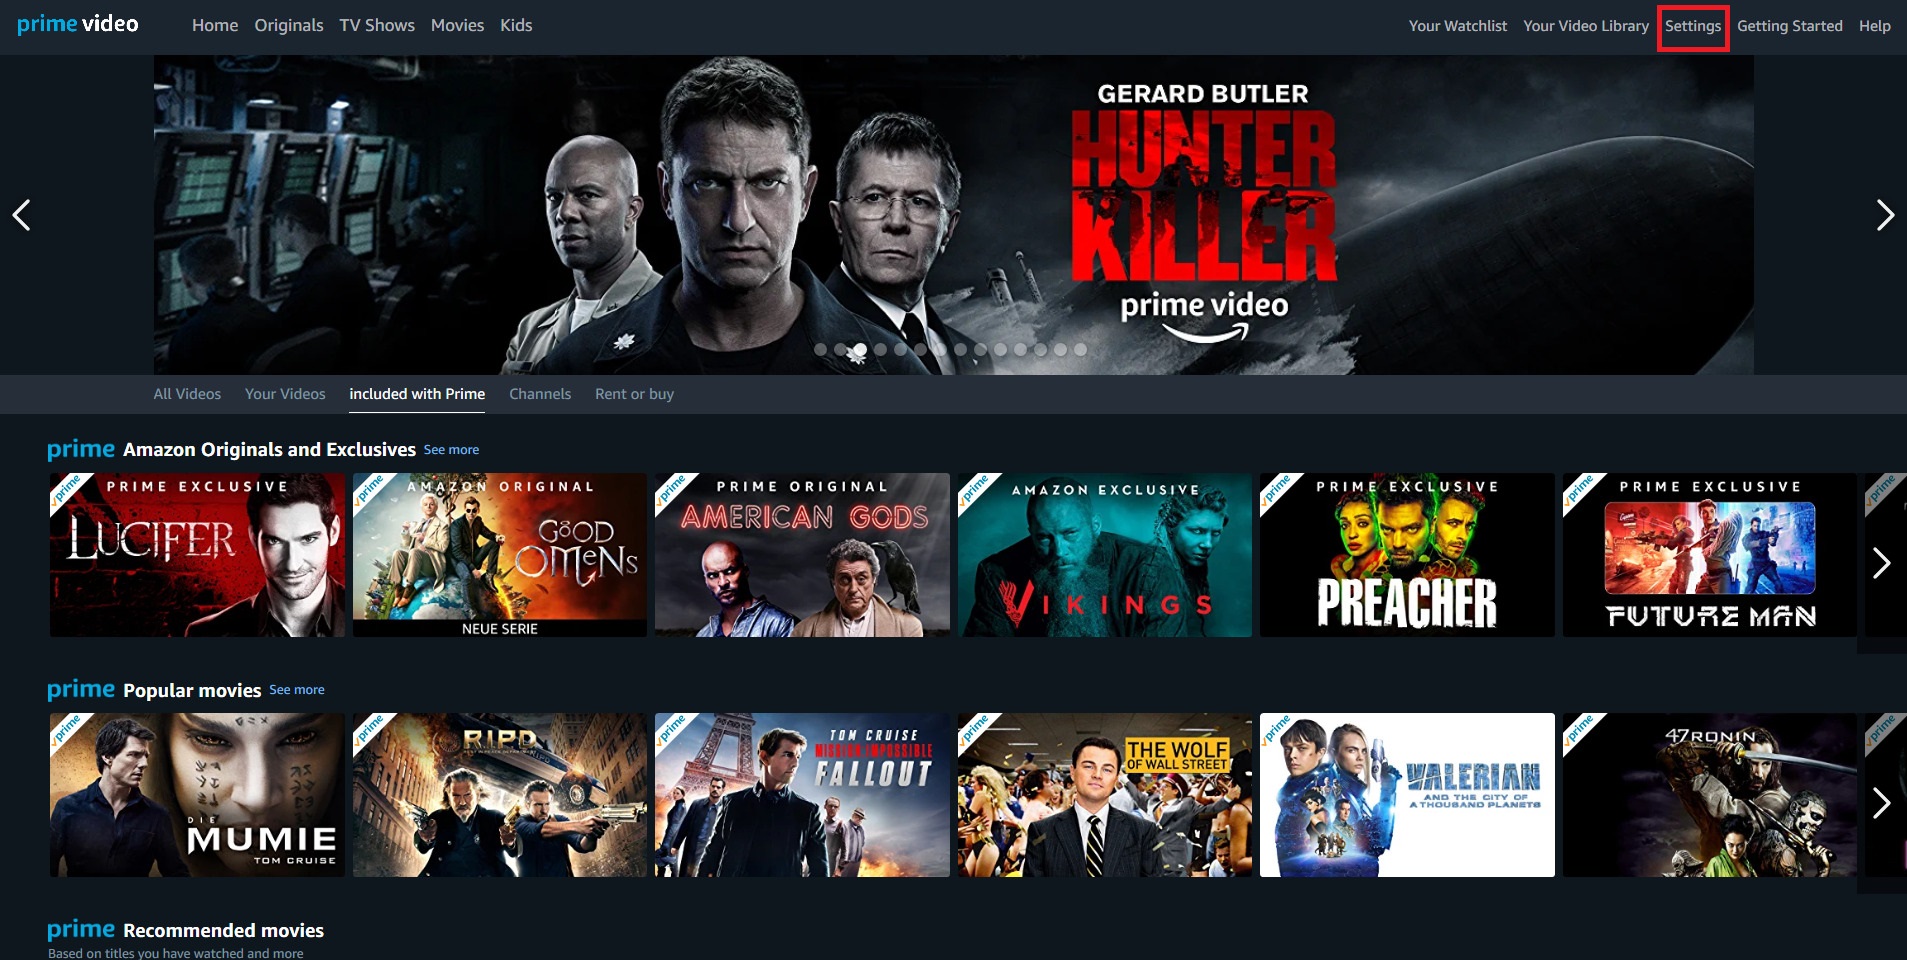 Amazon Prime Video: Pricing, content, and more - Android Authority